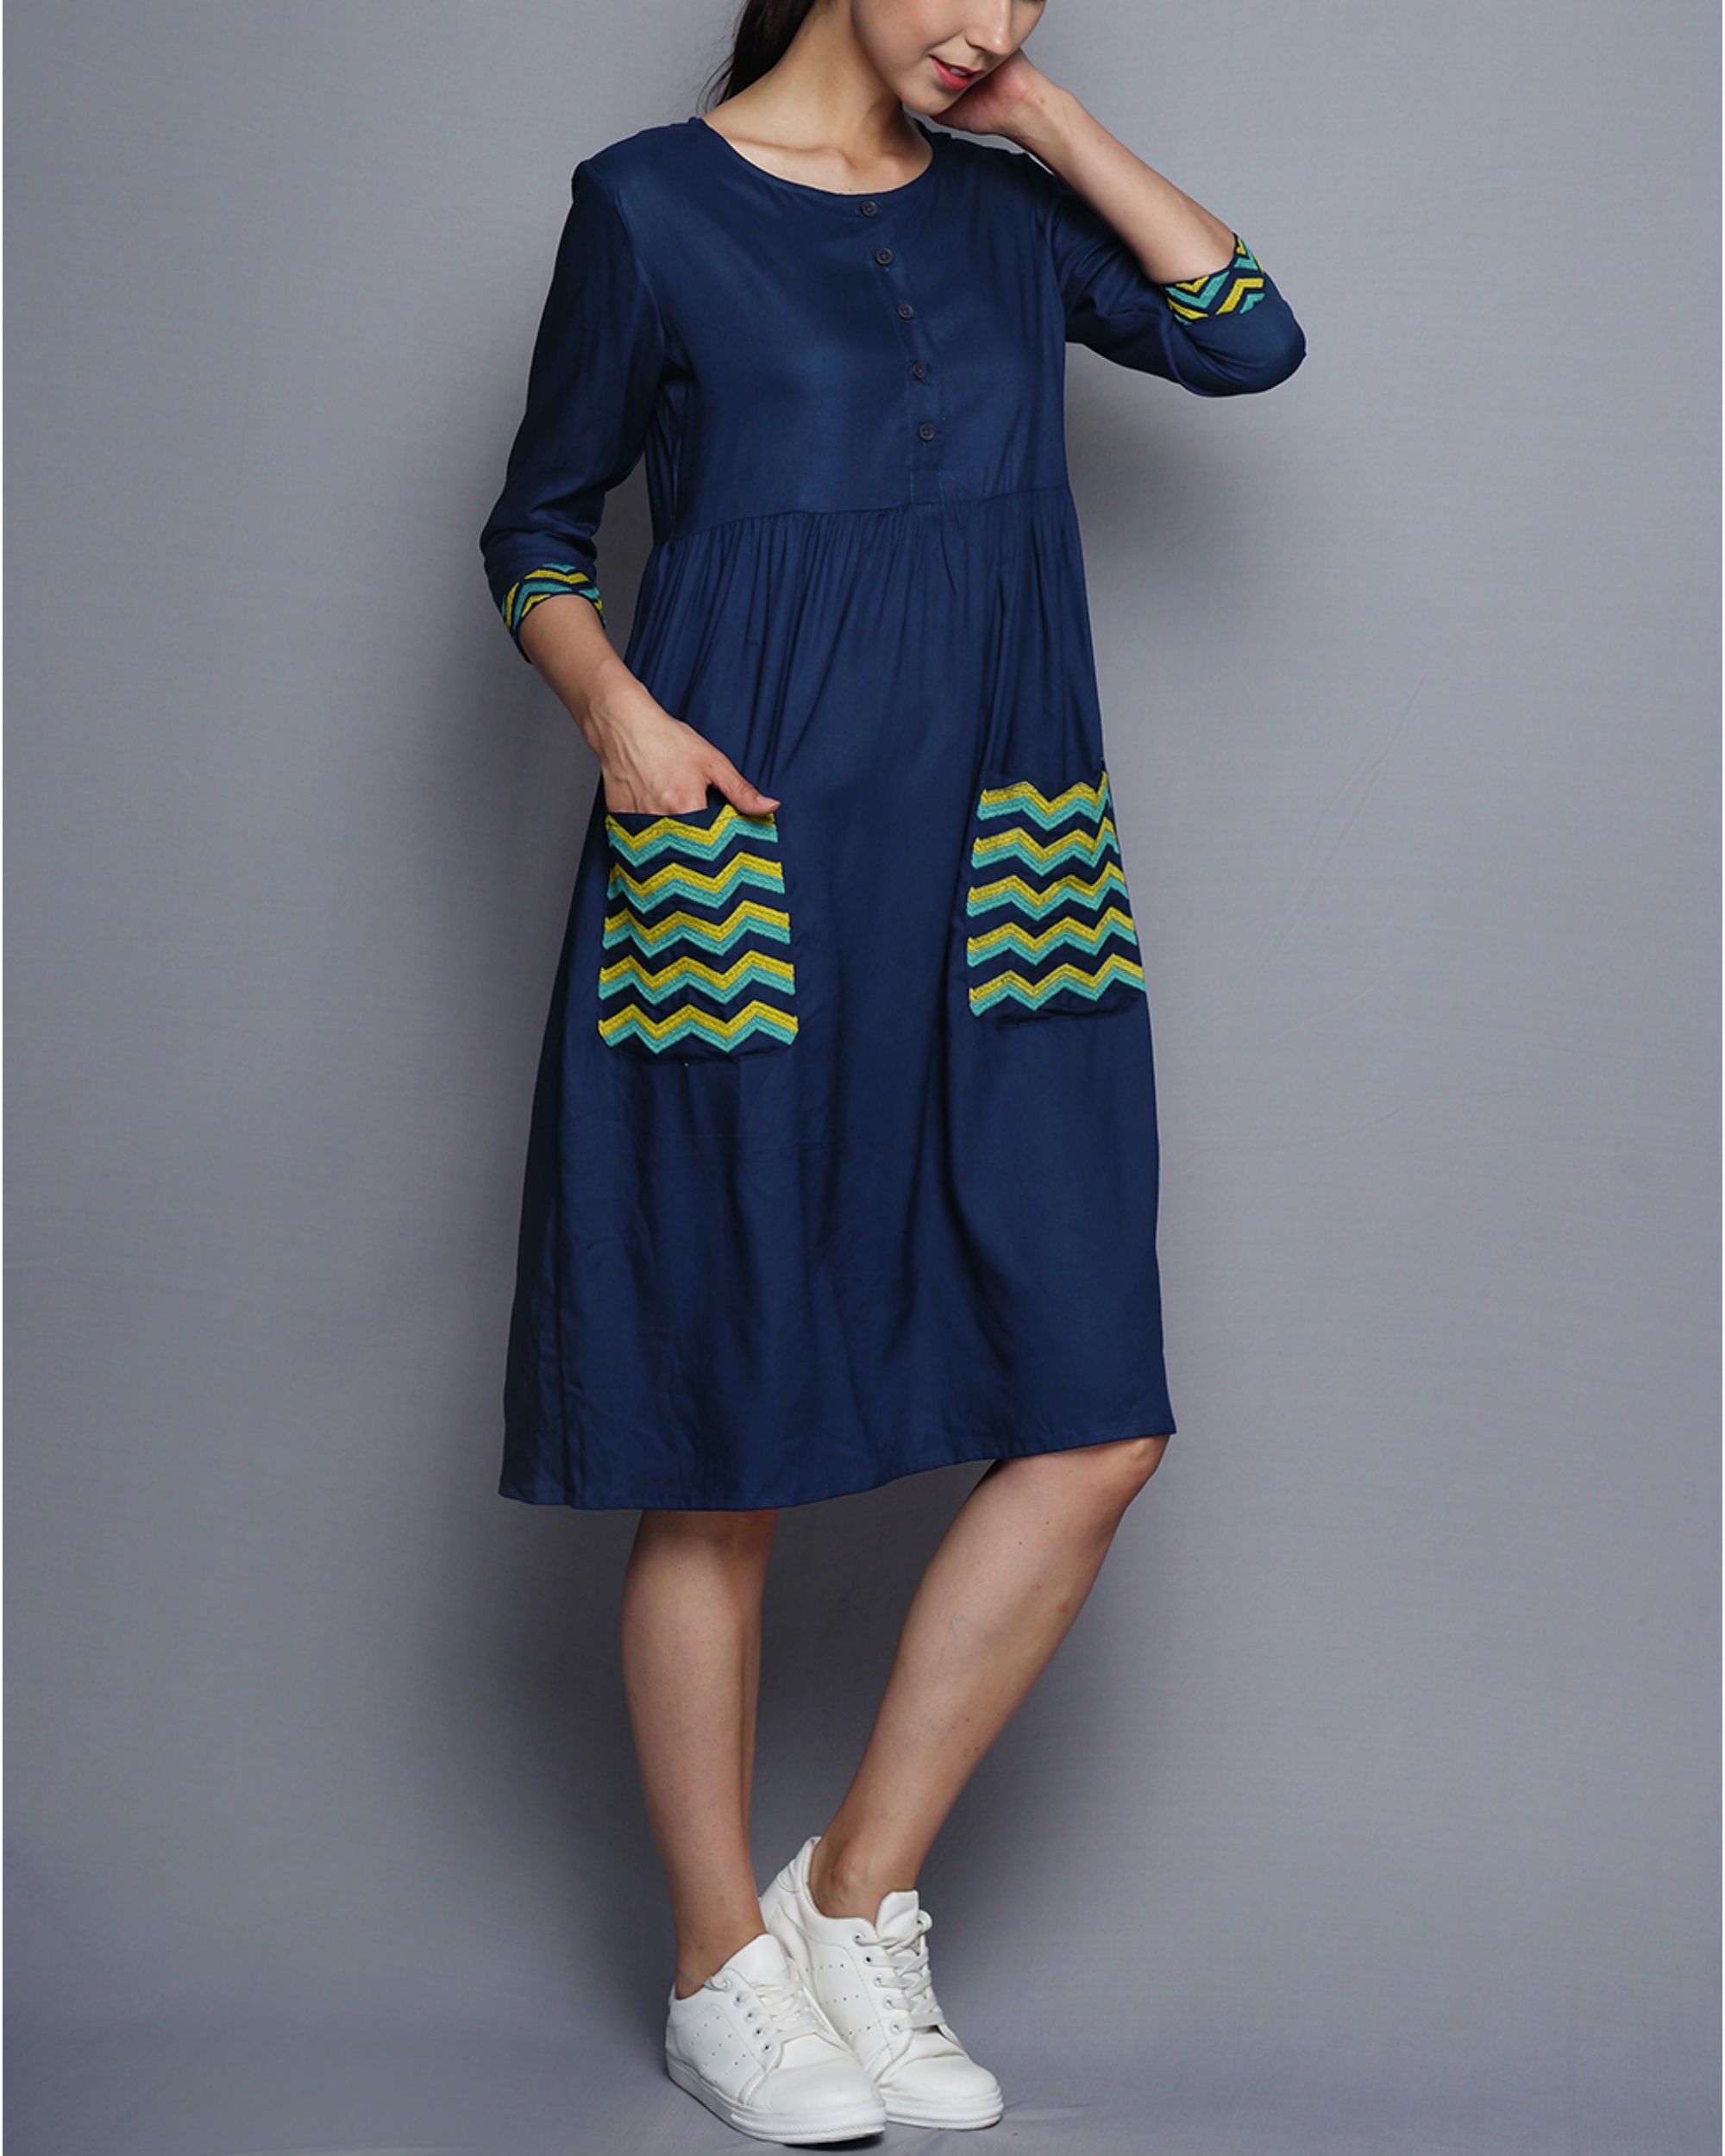 Blue pocket dress by UNTUNG | The ...